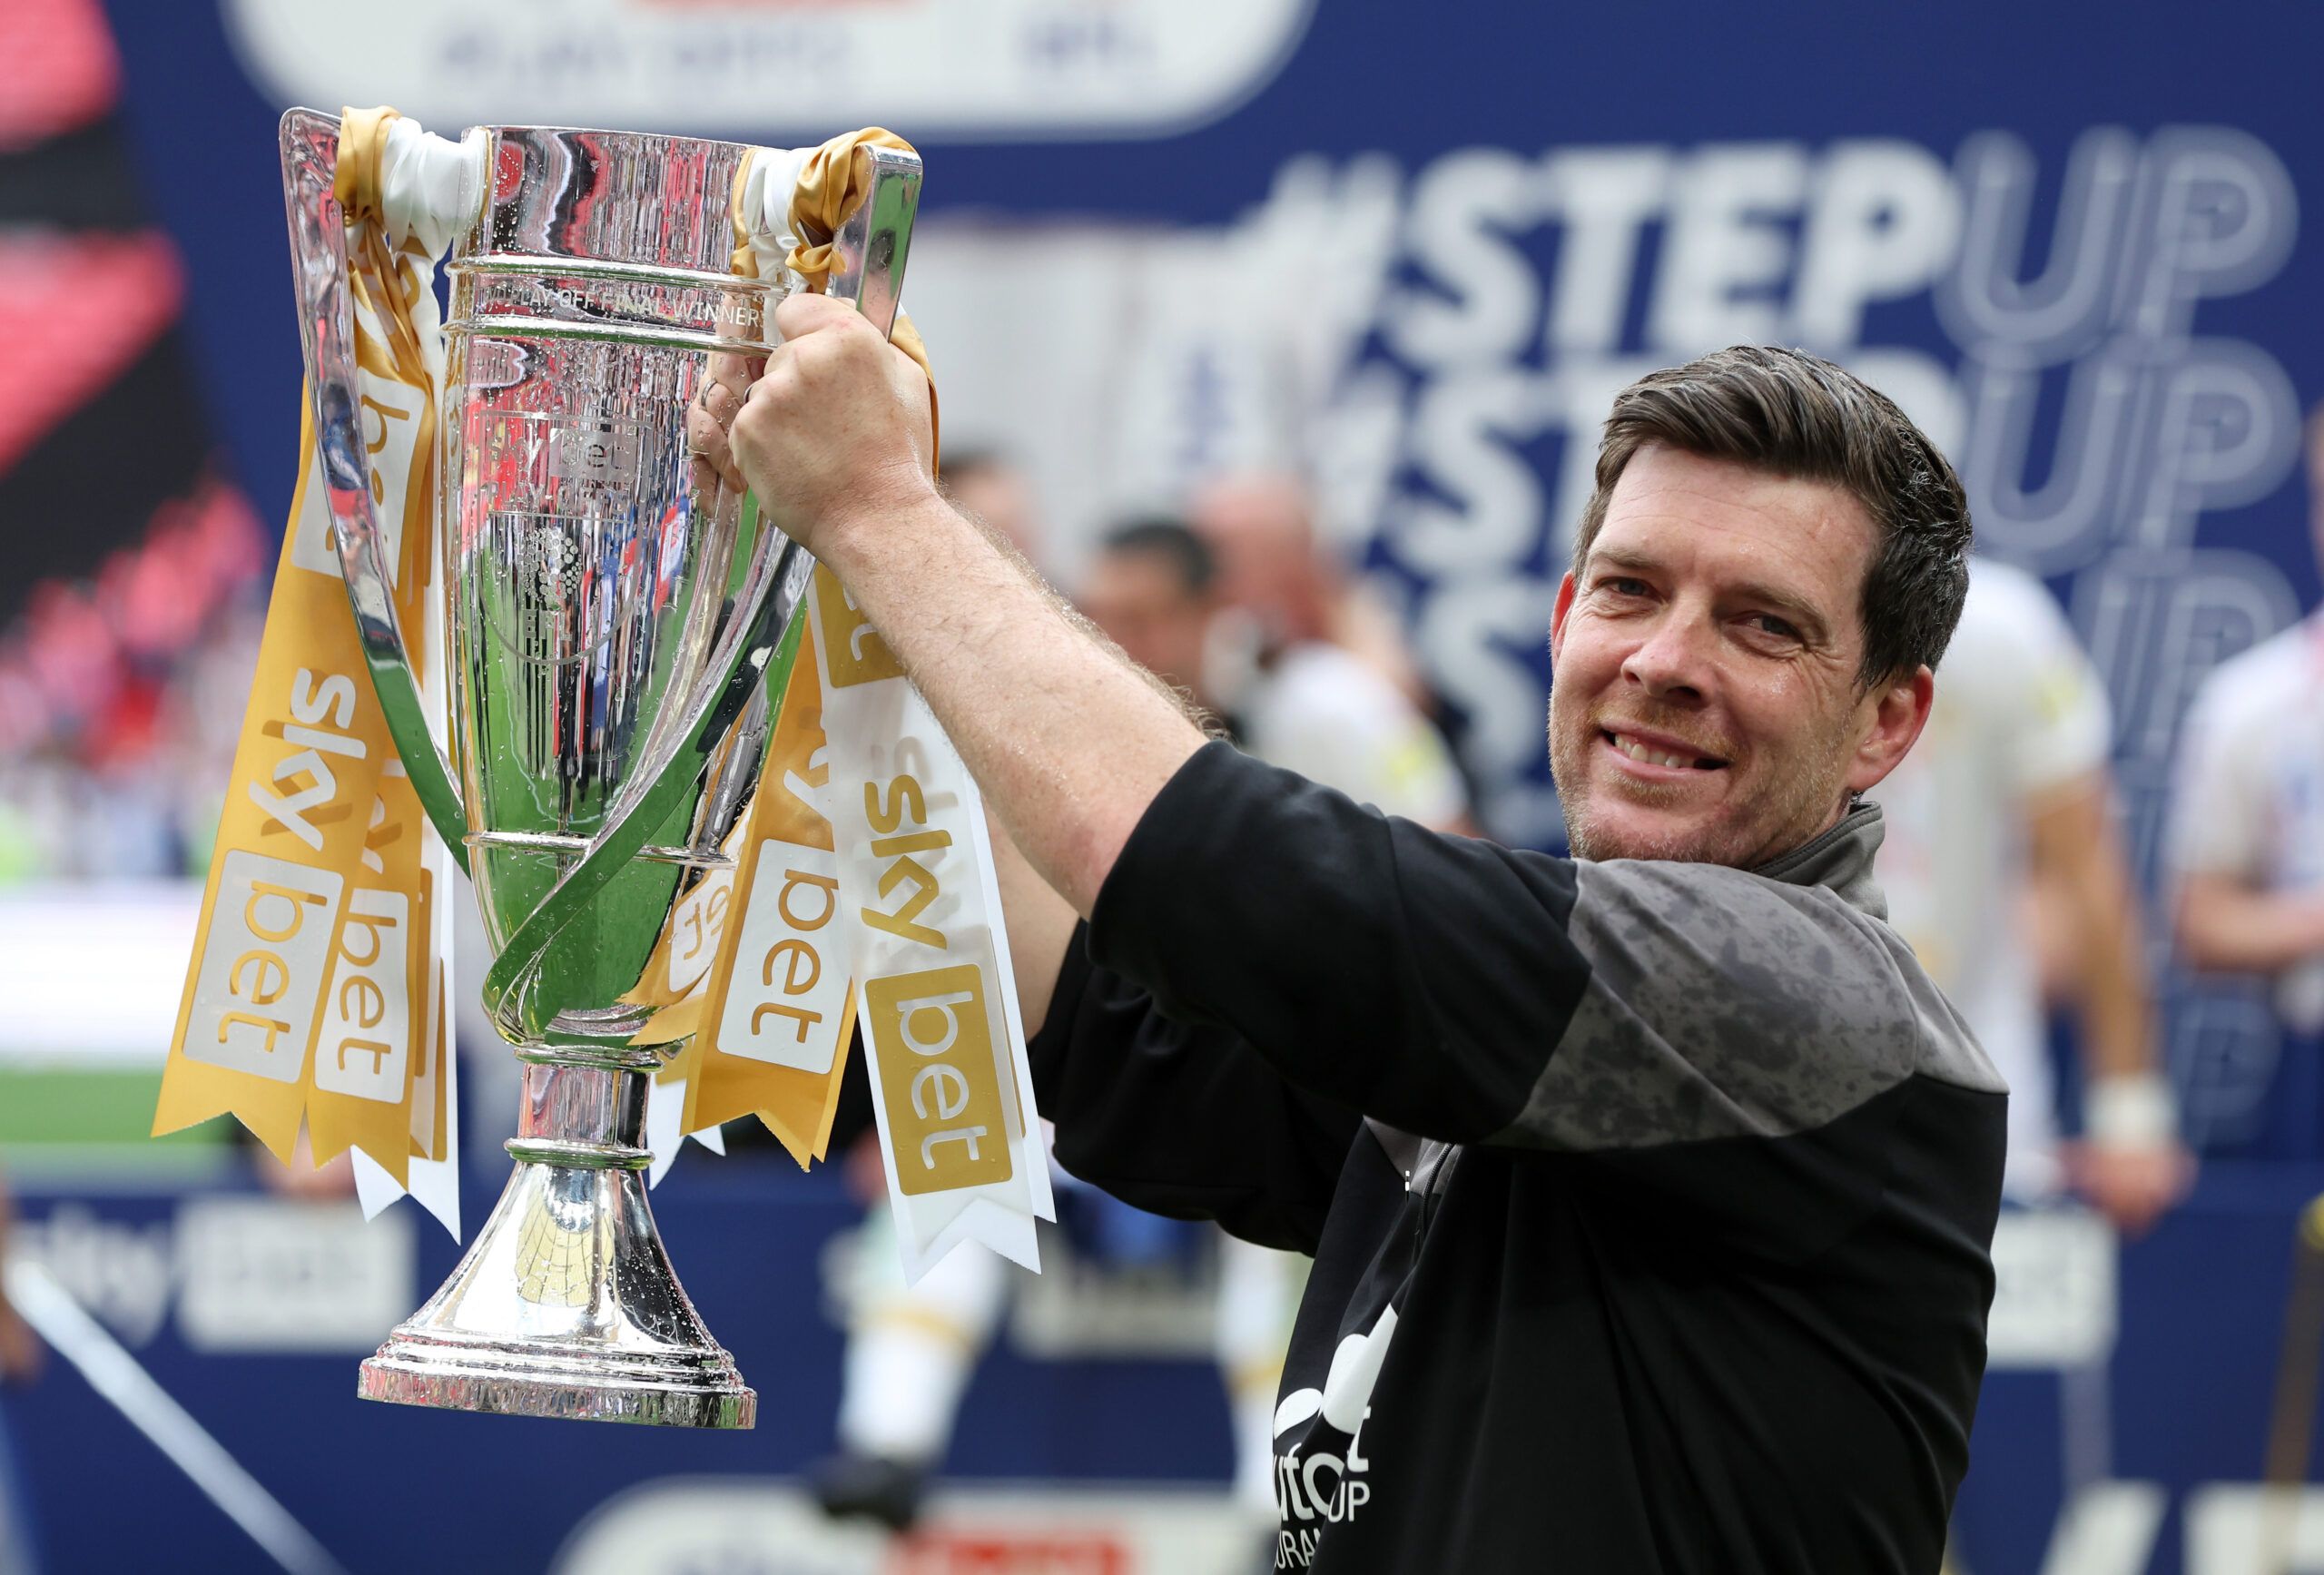 Soccer Football - League Two Play-Off Final - Mansfield Town v Port Vale - Wembley Stadium, London, Britain - May 28, 2022  Port Vale manager Darrell Clarke lifts the trophy after winning the League Two Play-Off Action Images/Paul Childs EDITORIAL USE ONLY. No use with unauthorized audio, video, data, fixture lists, club/league logos or 'live' services. Online in-match use limited to 75 images, no video emulation. No use in betting, games or single club /league/player publications.  Please conta